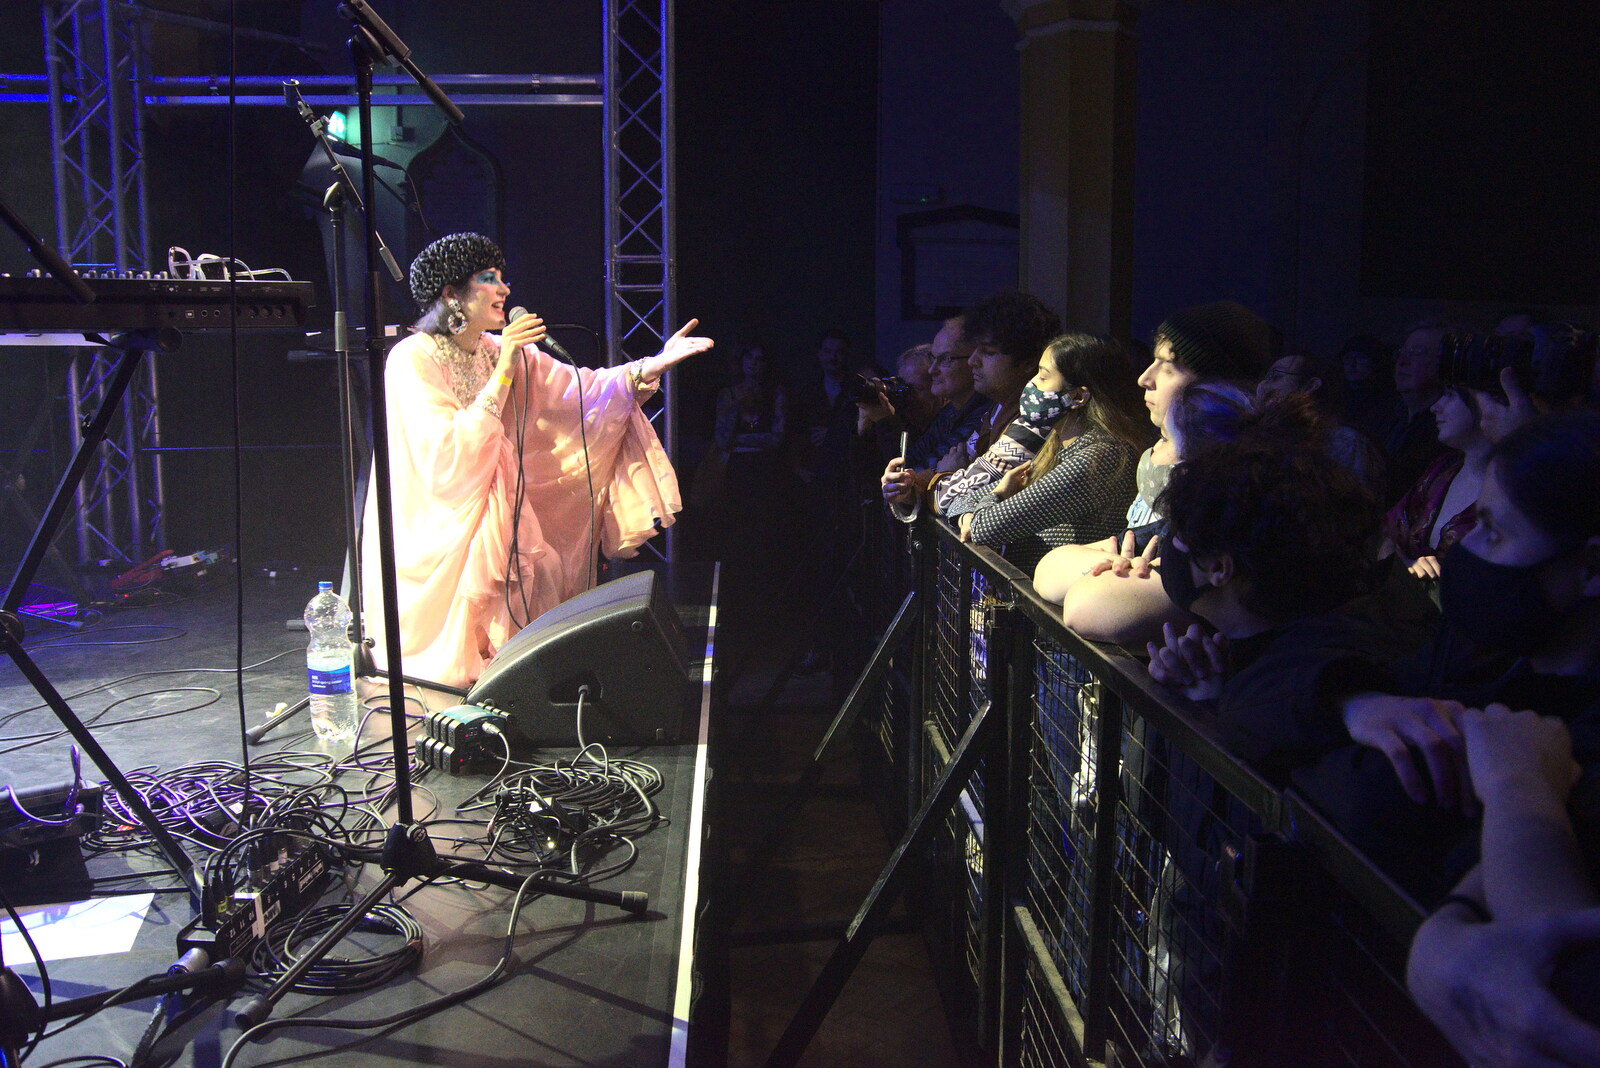 Vanity Fairy and Let's Eat Grandma, Arts Centre, Norwich - 26th January 2022: Pleading to the crowd